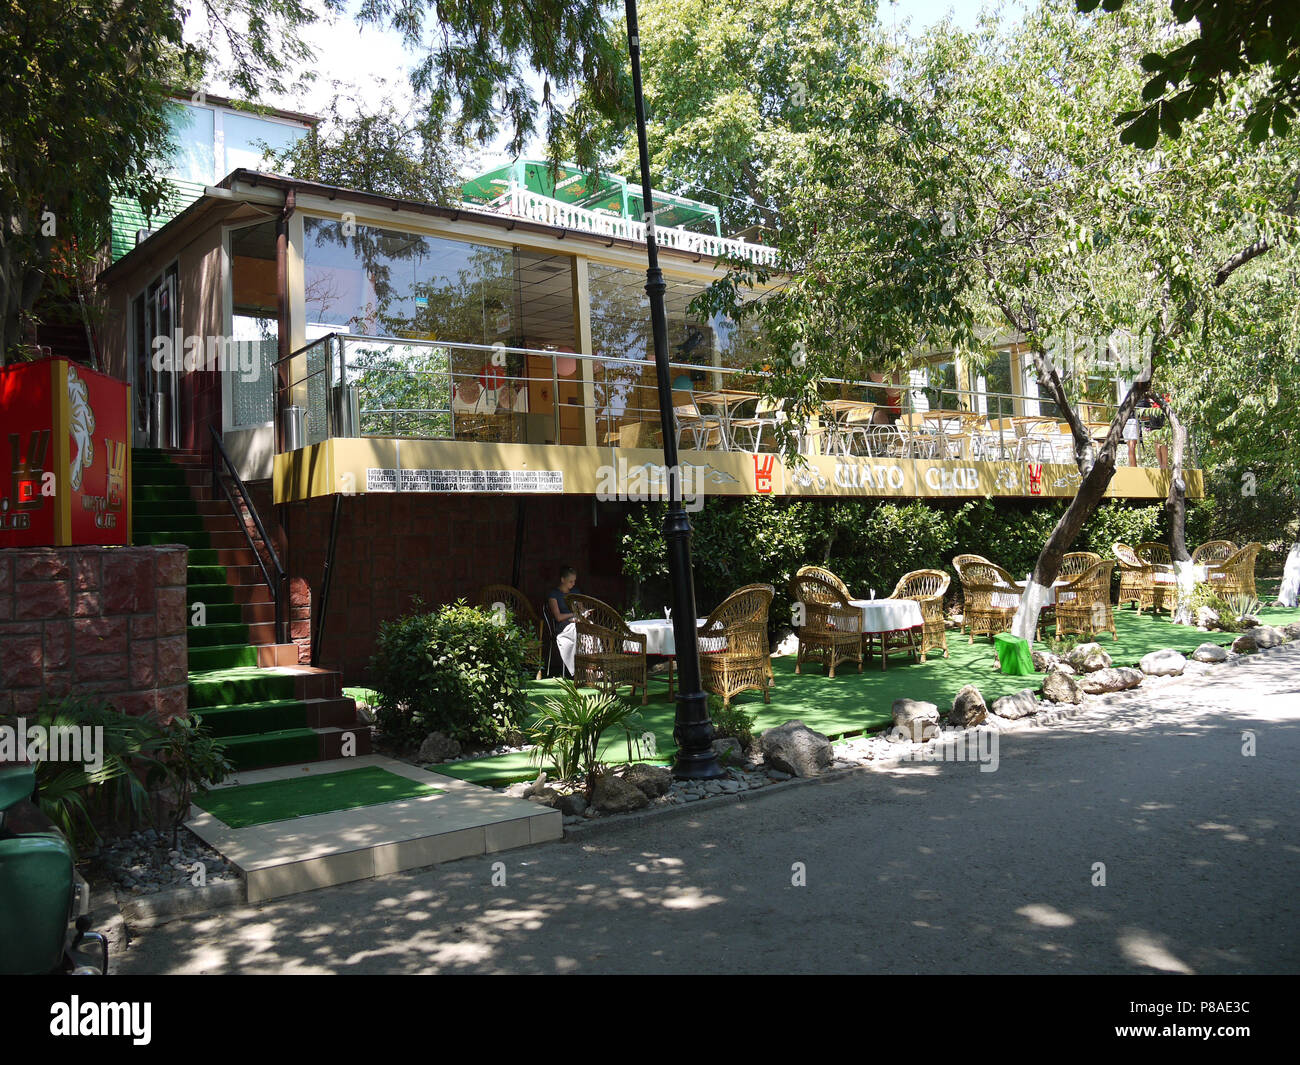 Two Story Cafe With A Terrace And A Green Staircase Surrounded By Trees For Your Design P8AE3C 